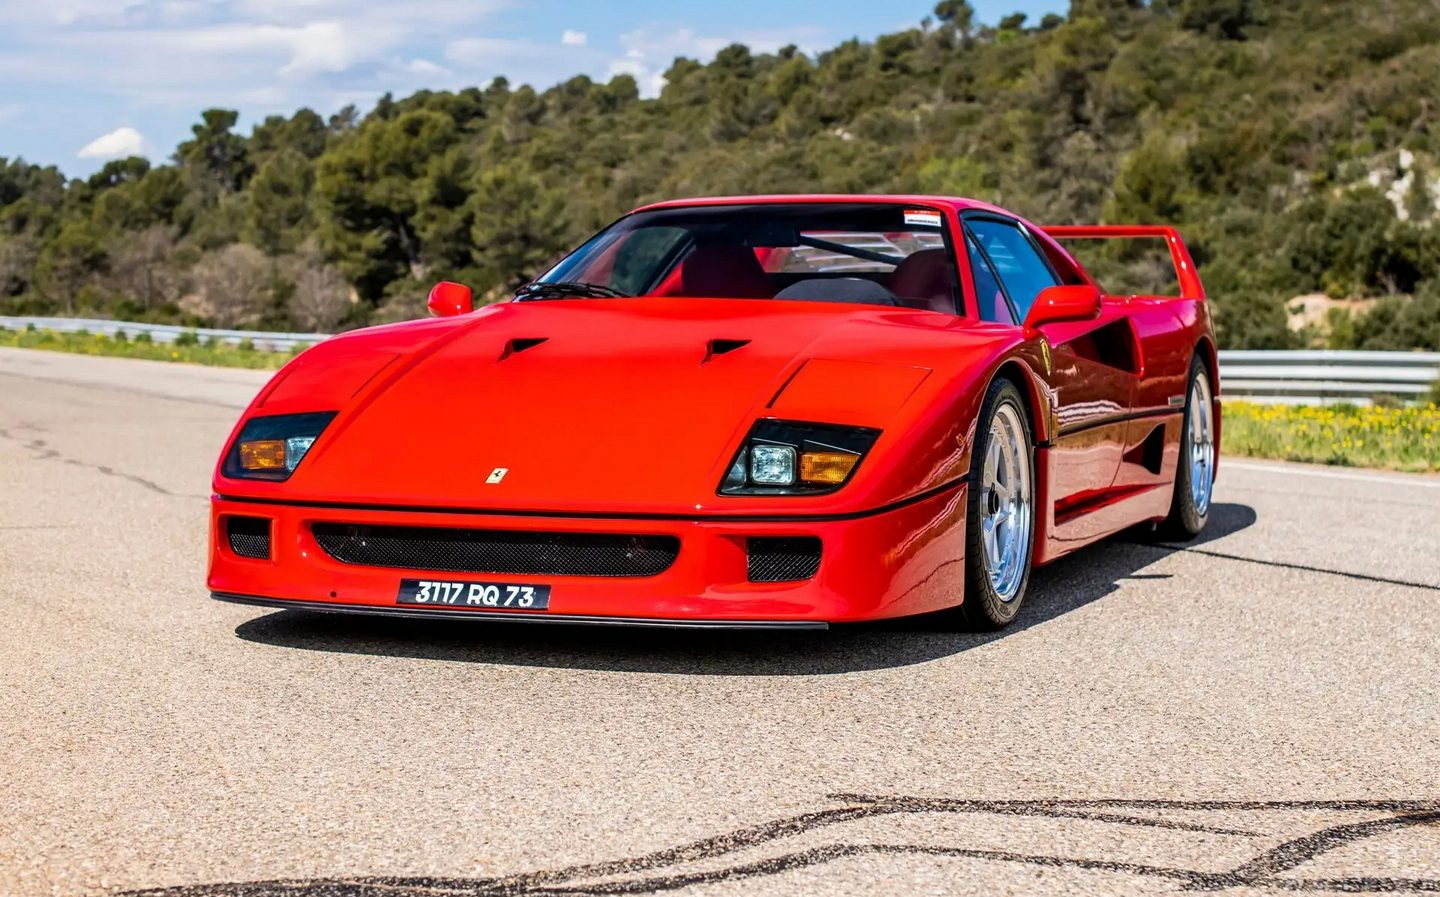 F1 legend Alain Prost’s signed Ferrari F40 expected to fetch up to £2.6m at auction